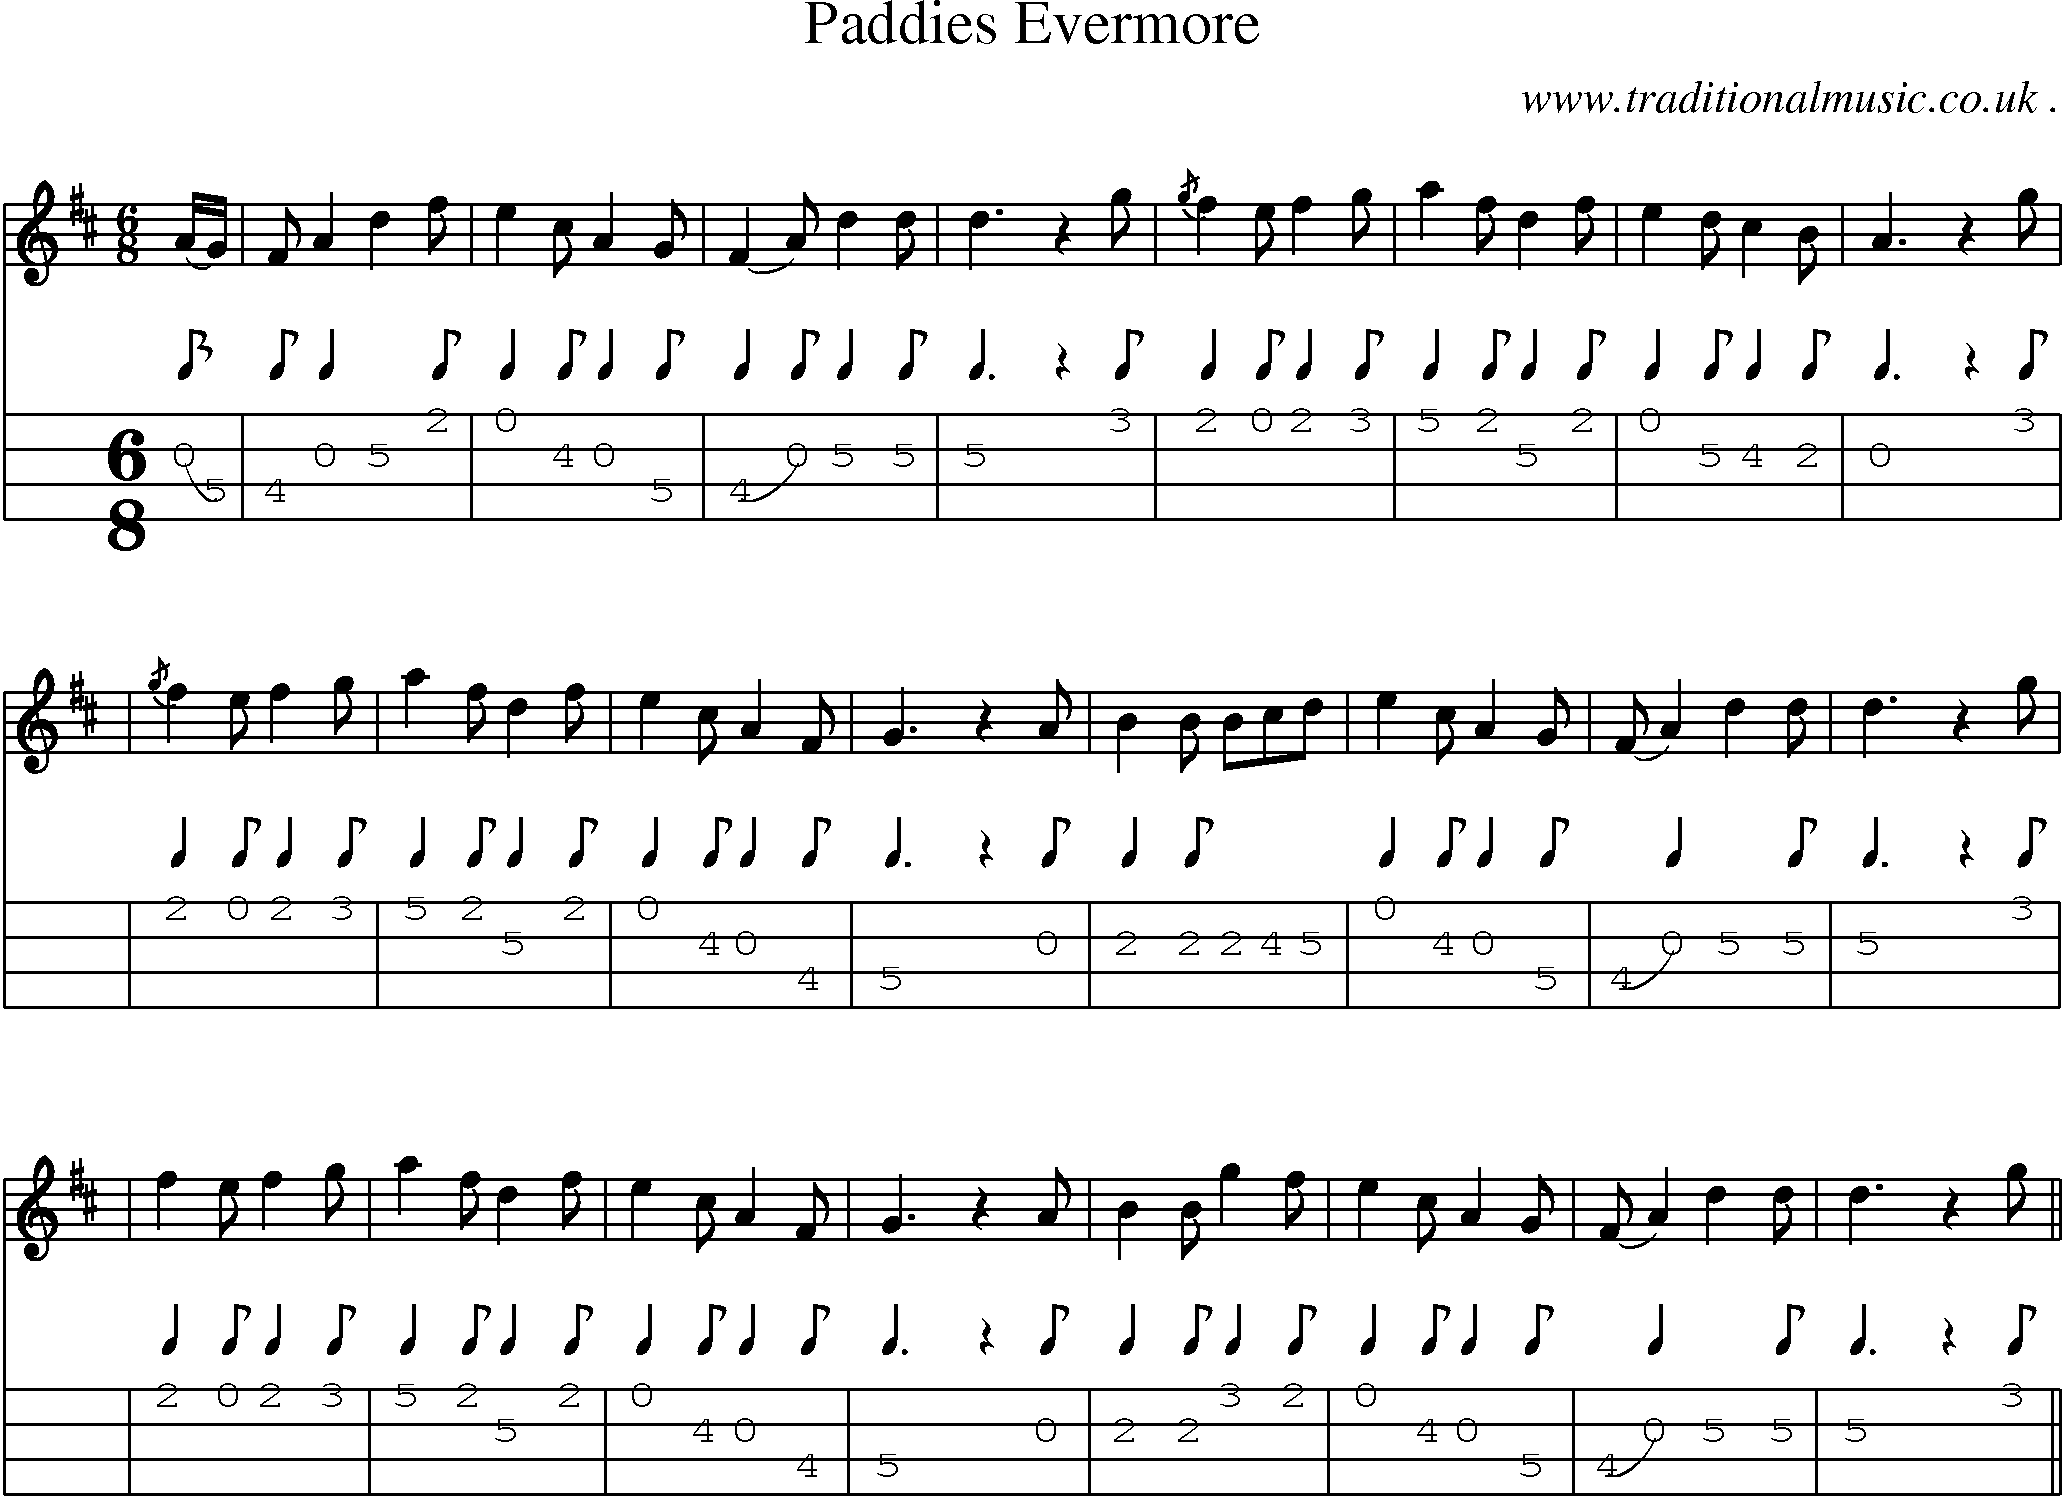 Sheet-music  score, Chords and Mandolin Tabs for Paddies Evermore